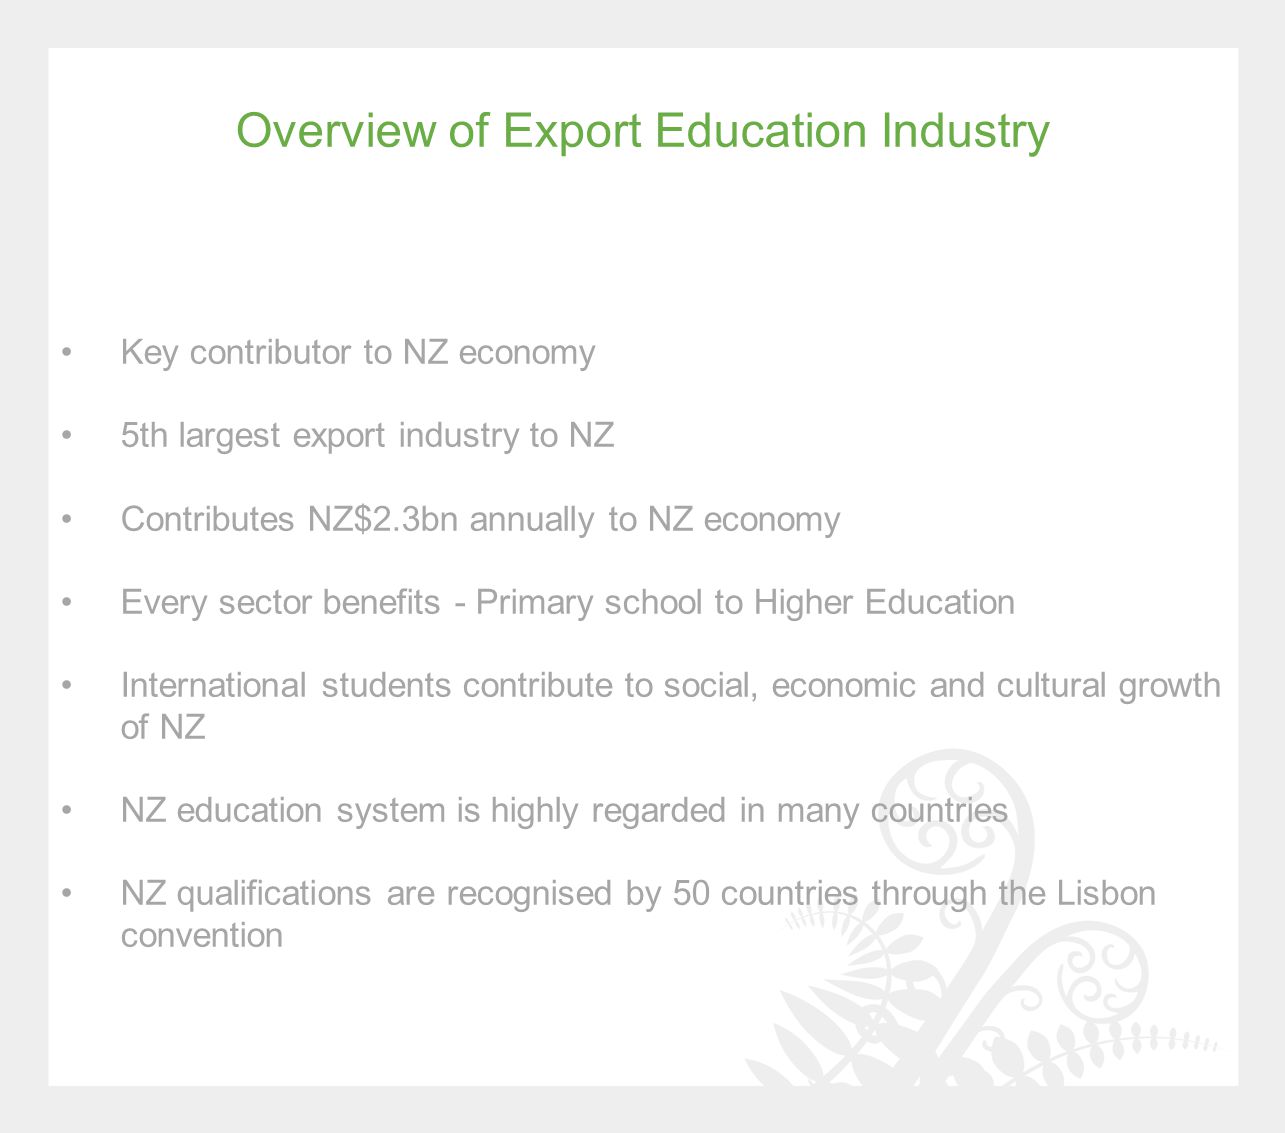 Overview of Export Education Industry Key contributor to NZ economy 5th largest export industry to NZ Contributes NZ$2.3bn annually to NZ economy Every sector benefits - Primary school to Higher Education International students contribute to social, economic and cultural growth of NZ NZ education system is highly regarded in many countries NZ qualifications are recognised by 50 countries through the Lisbon convention